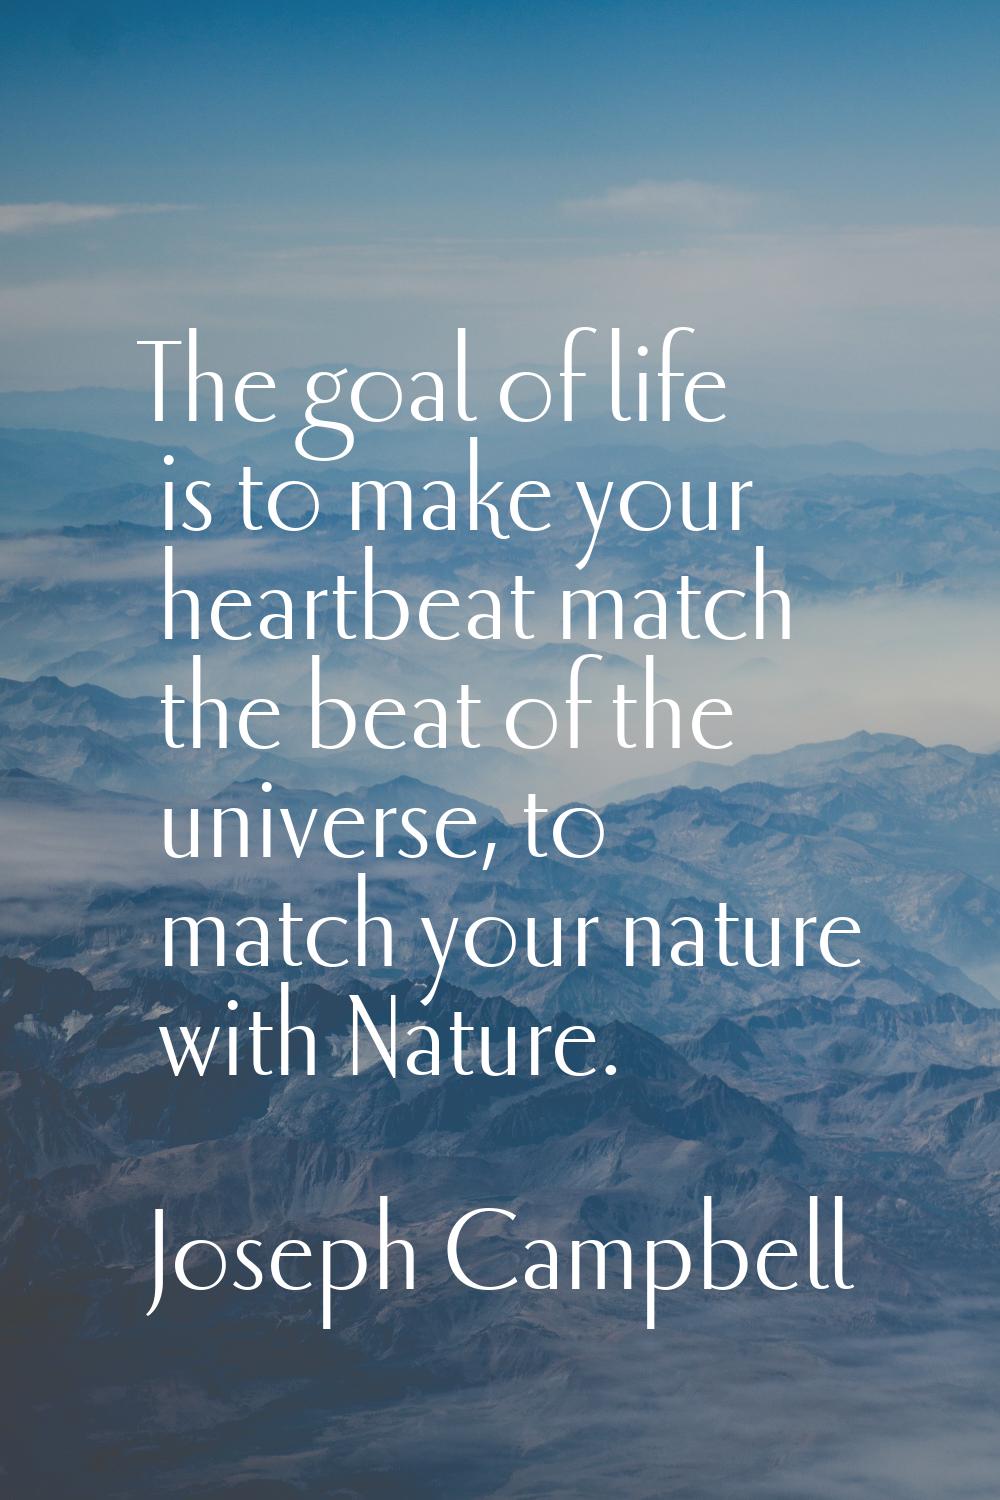 The goal of life is to make your heartbeat match the beat of the universe, to match your nature wit